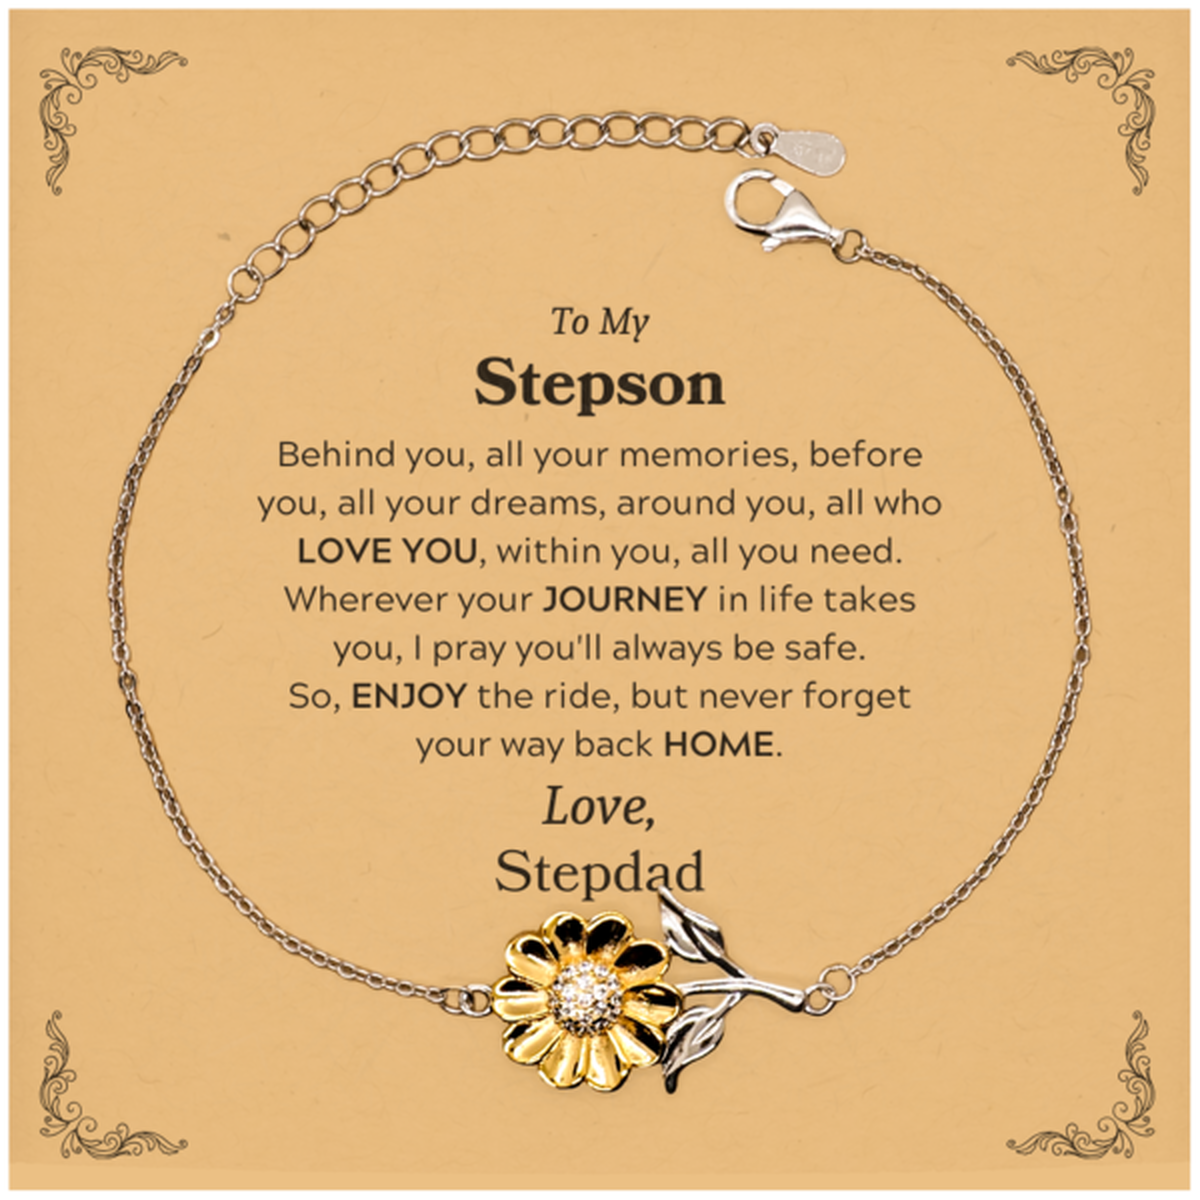 To My Stepson Graduation Gifts from Stepdad, Stepson Sunflower Bracelet Christmas Birthday Gifts for Stepson Behind you, all your memories, before you, all your dreams. Love, Stepdad